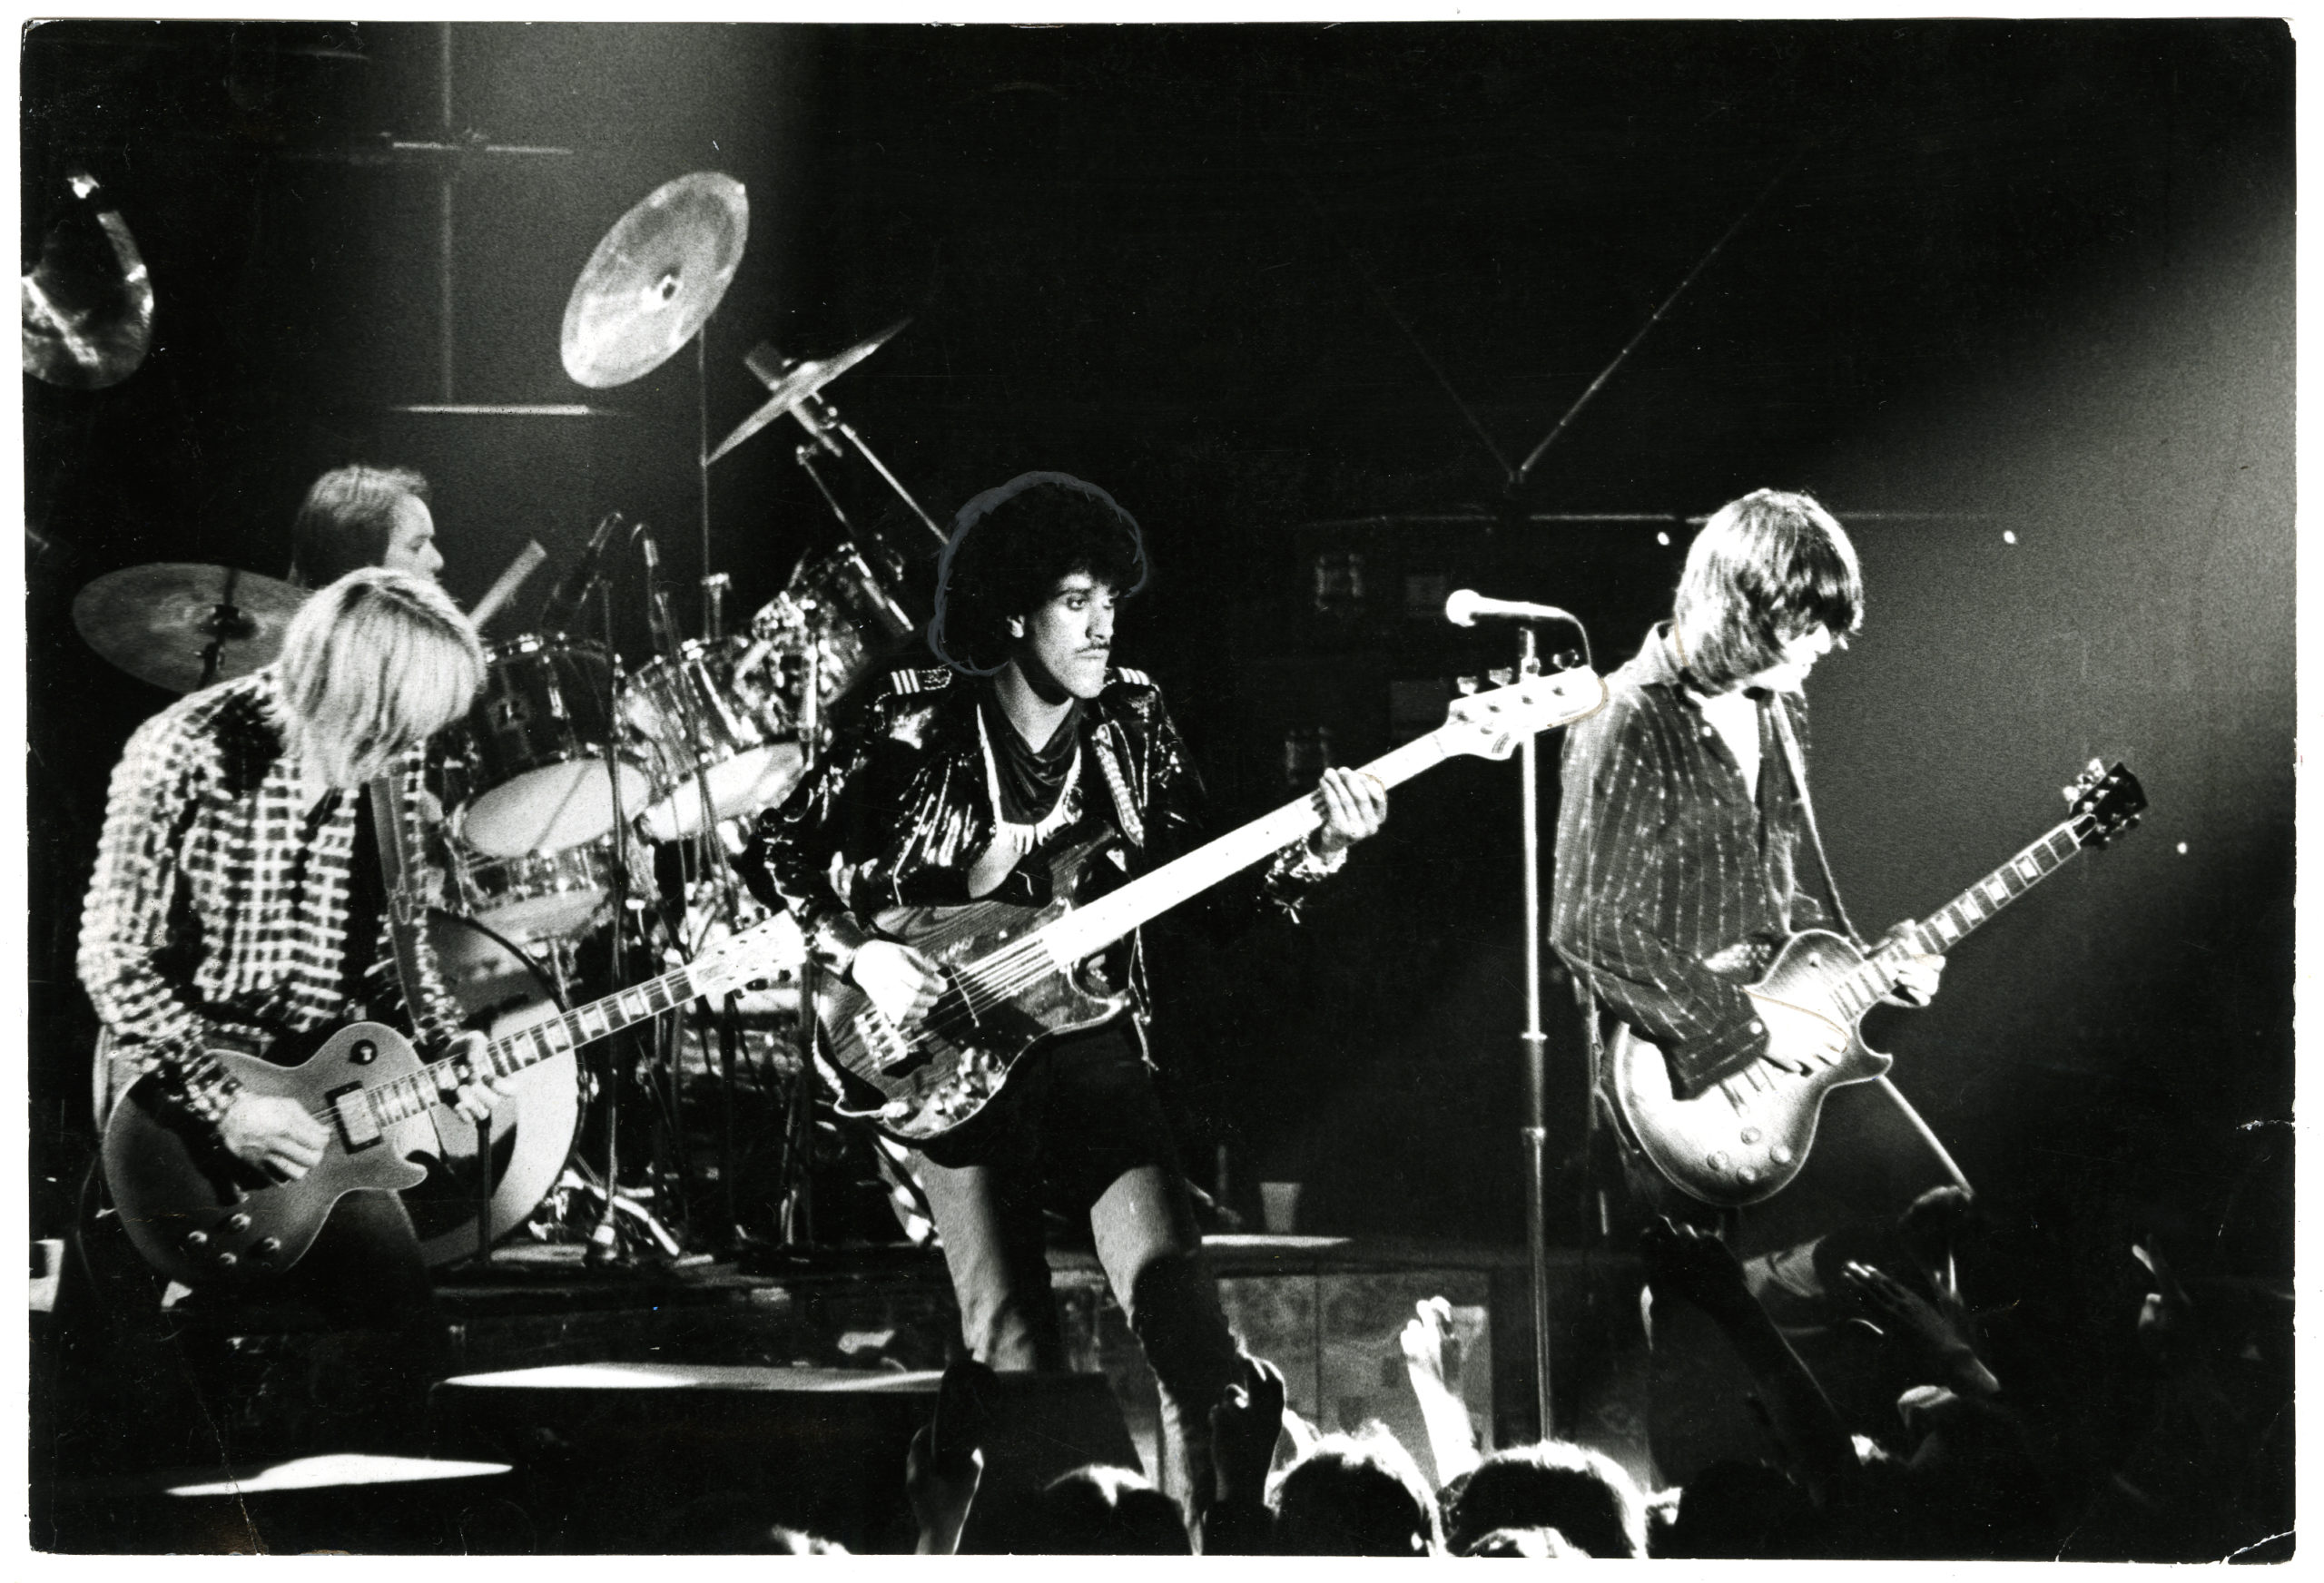 Thin Lizzy performing in concert in 1980.